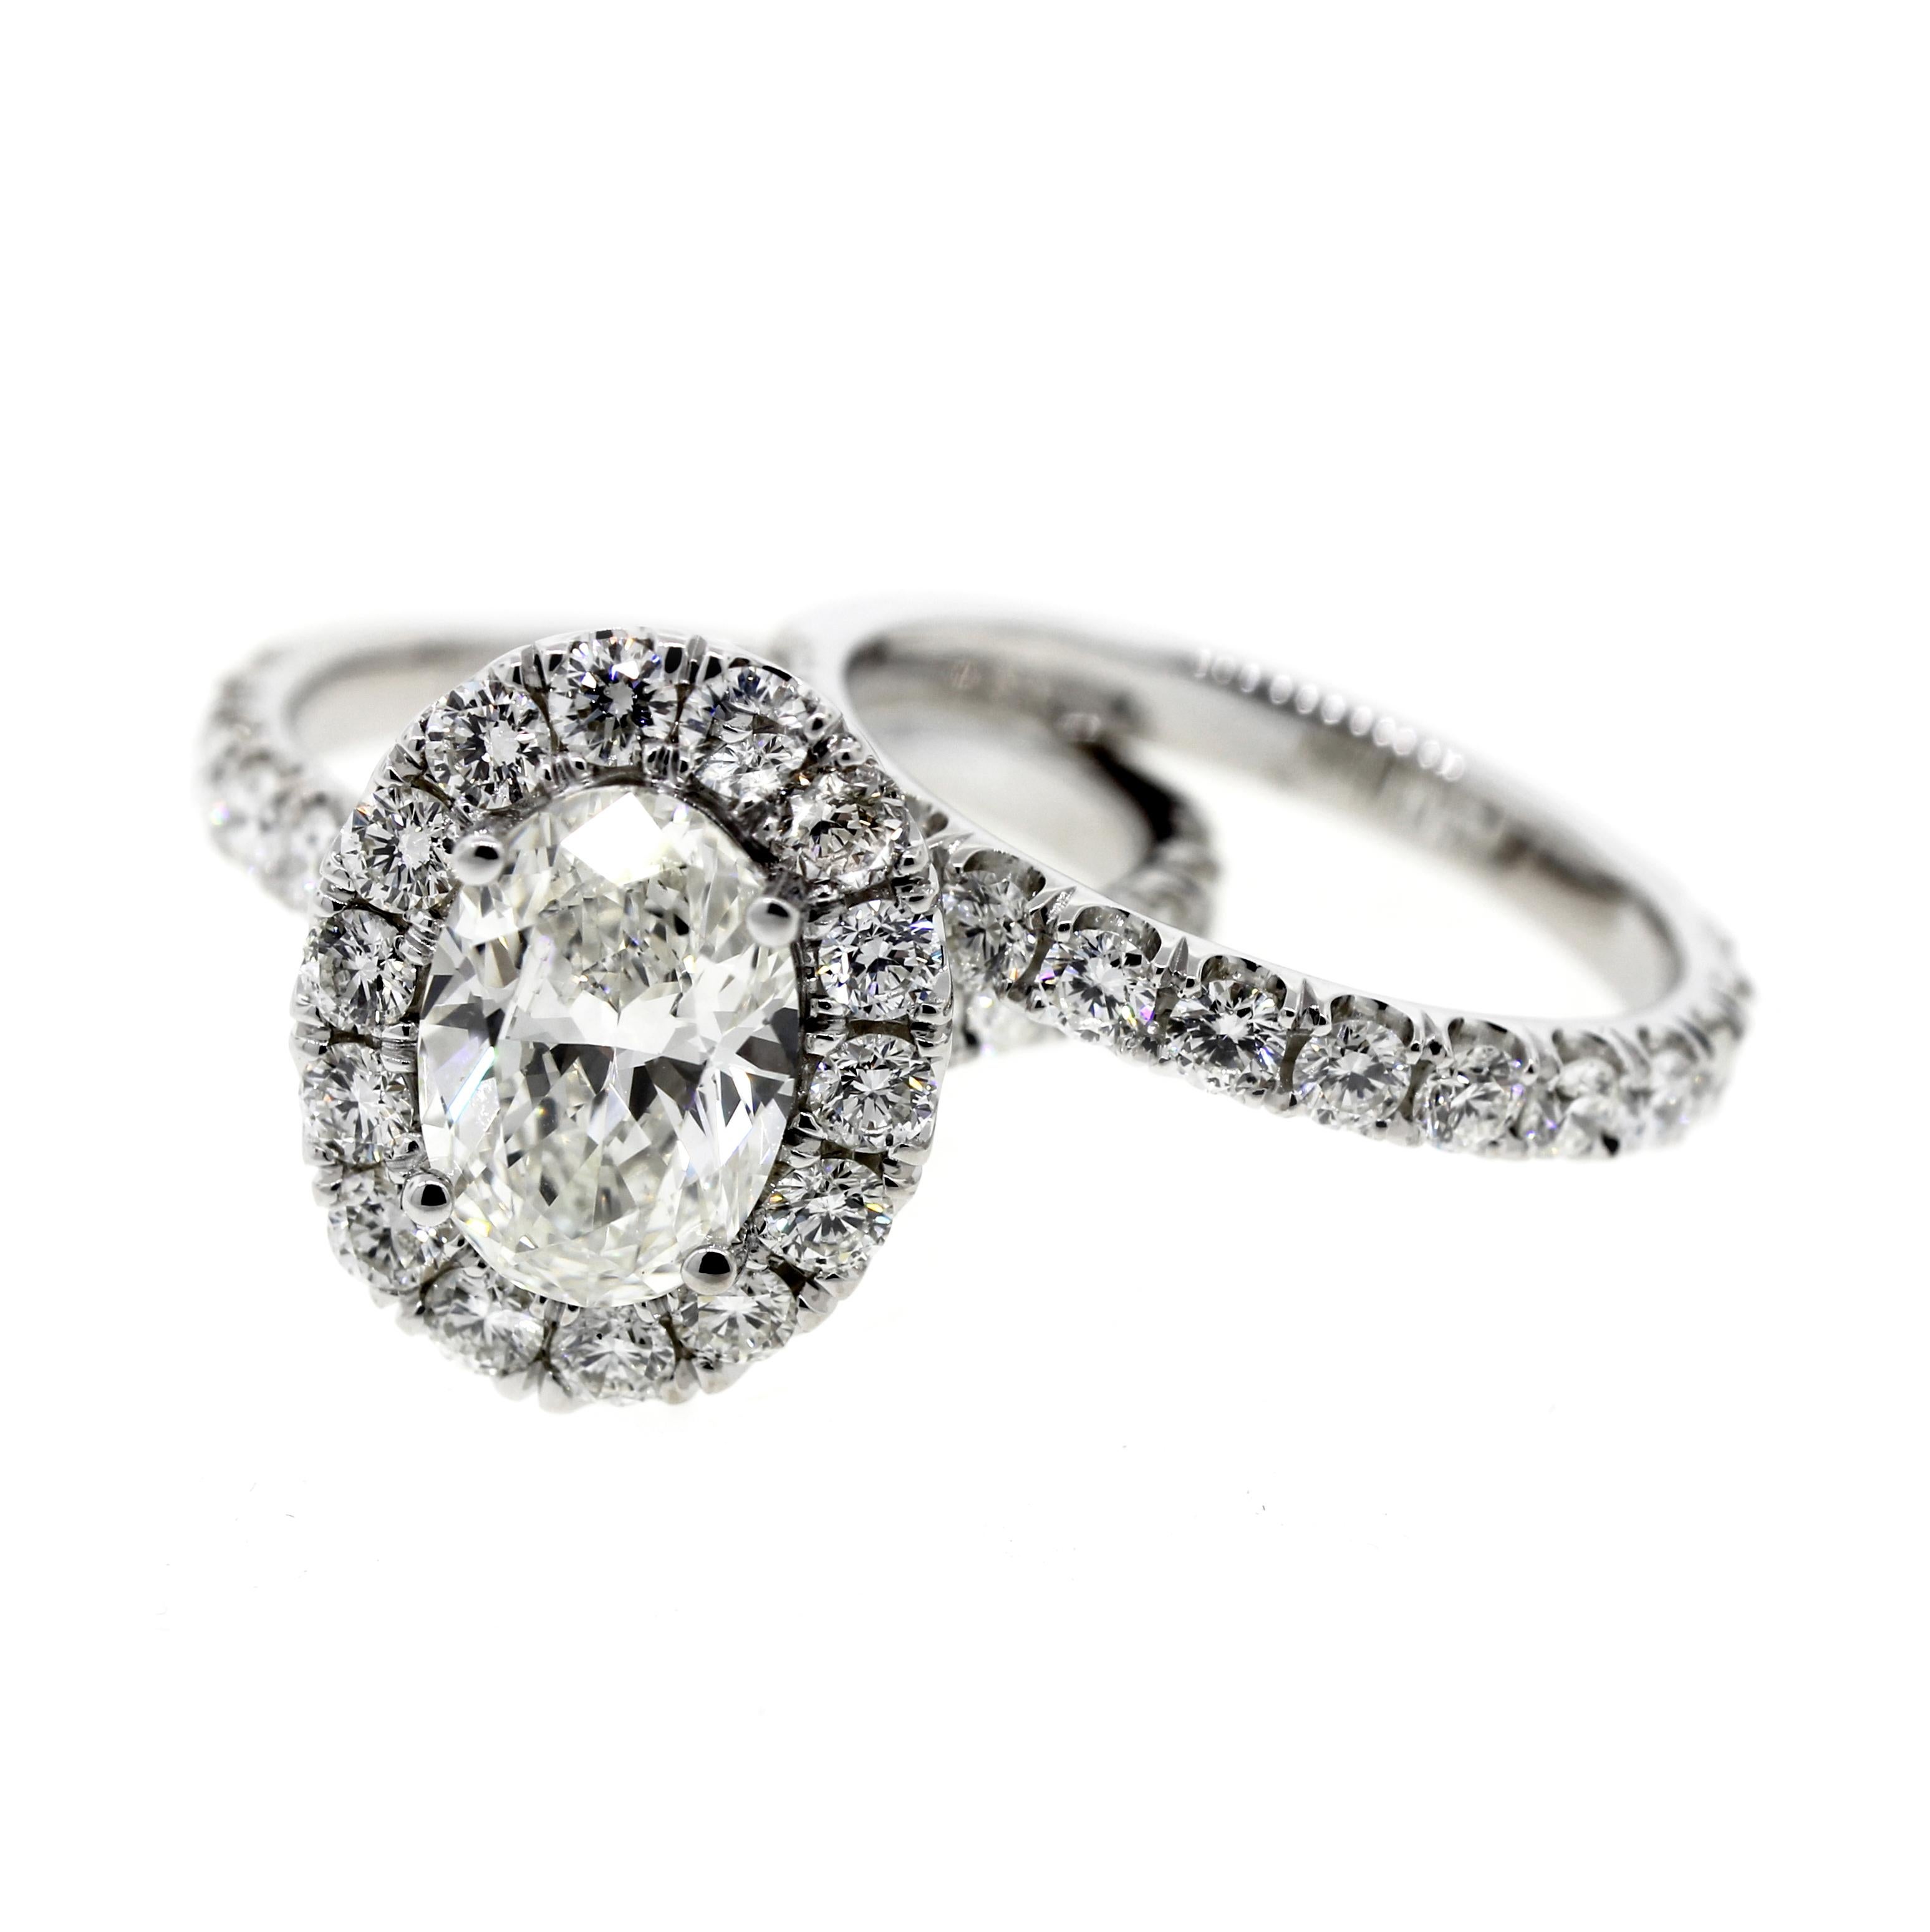 oval halo engagement rings